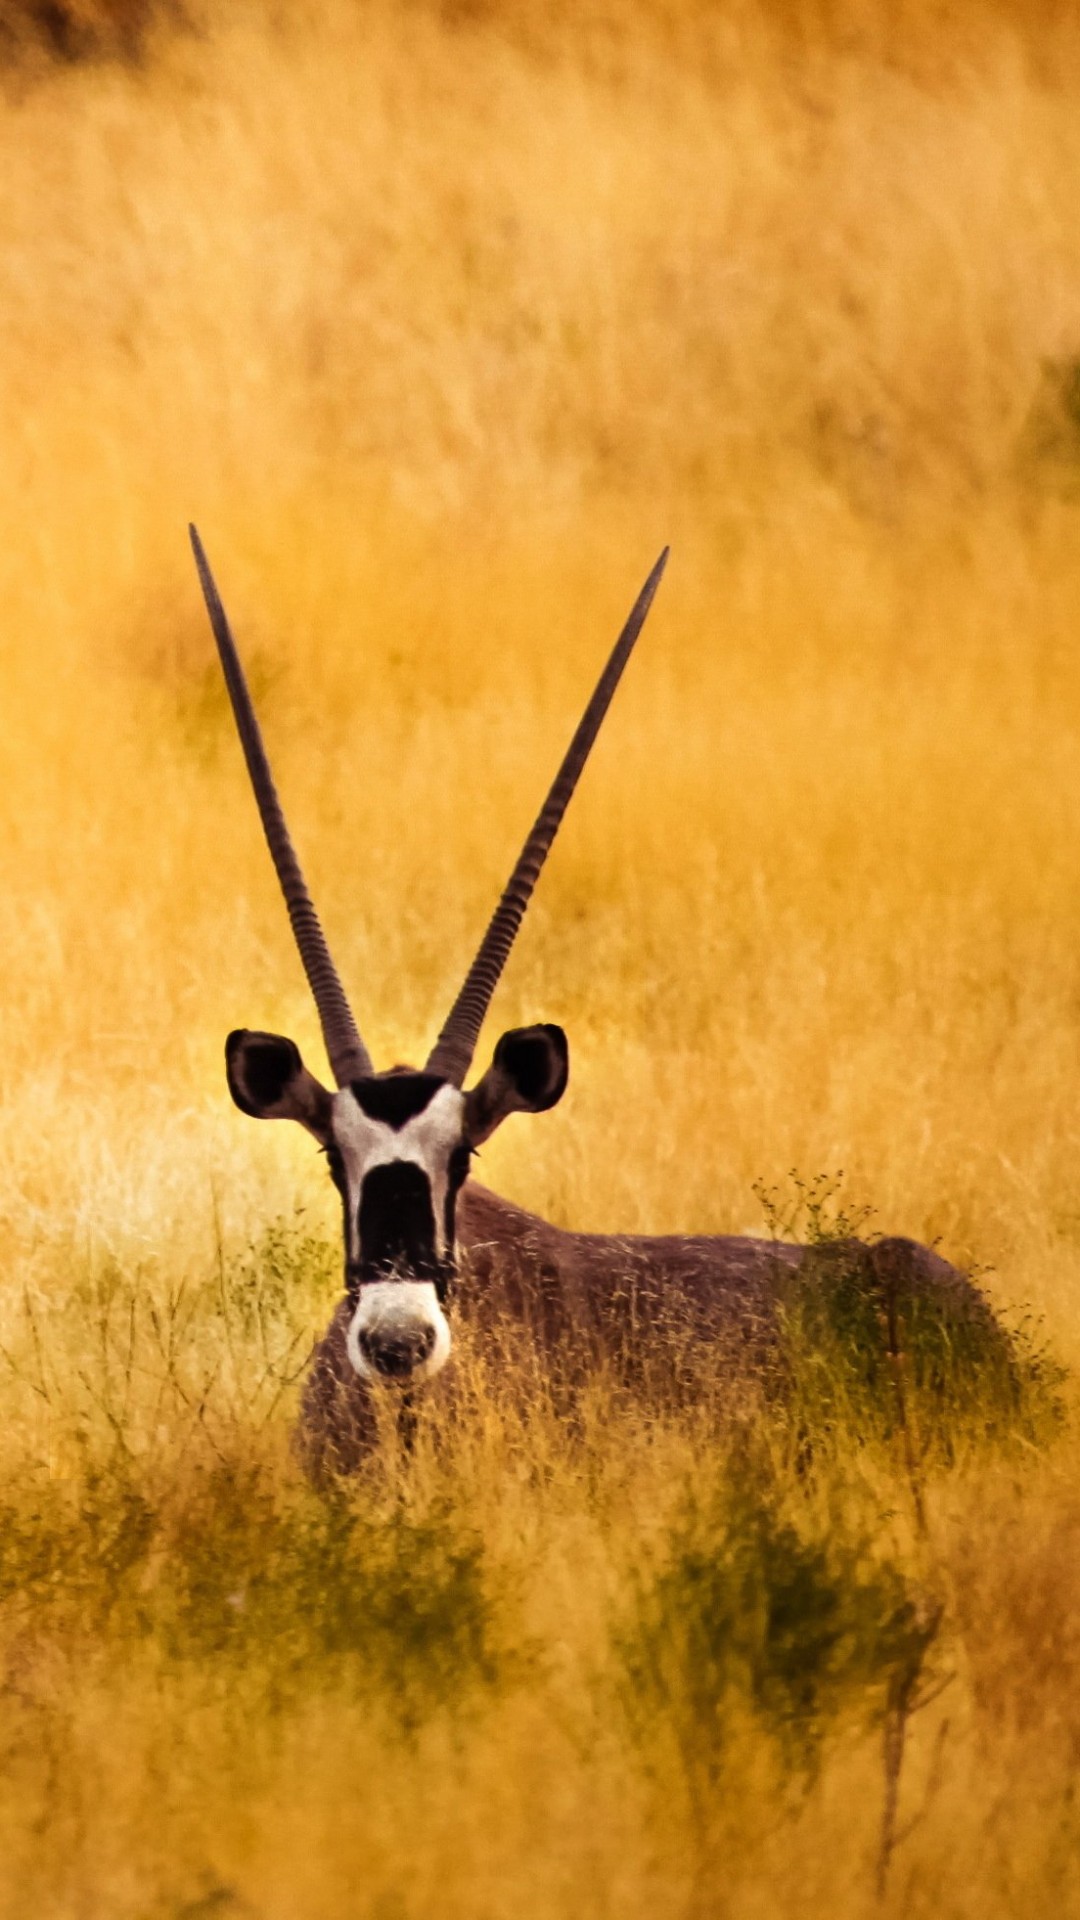 Antelope In The Savanna Wallpaper for HTC One